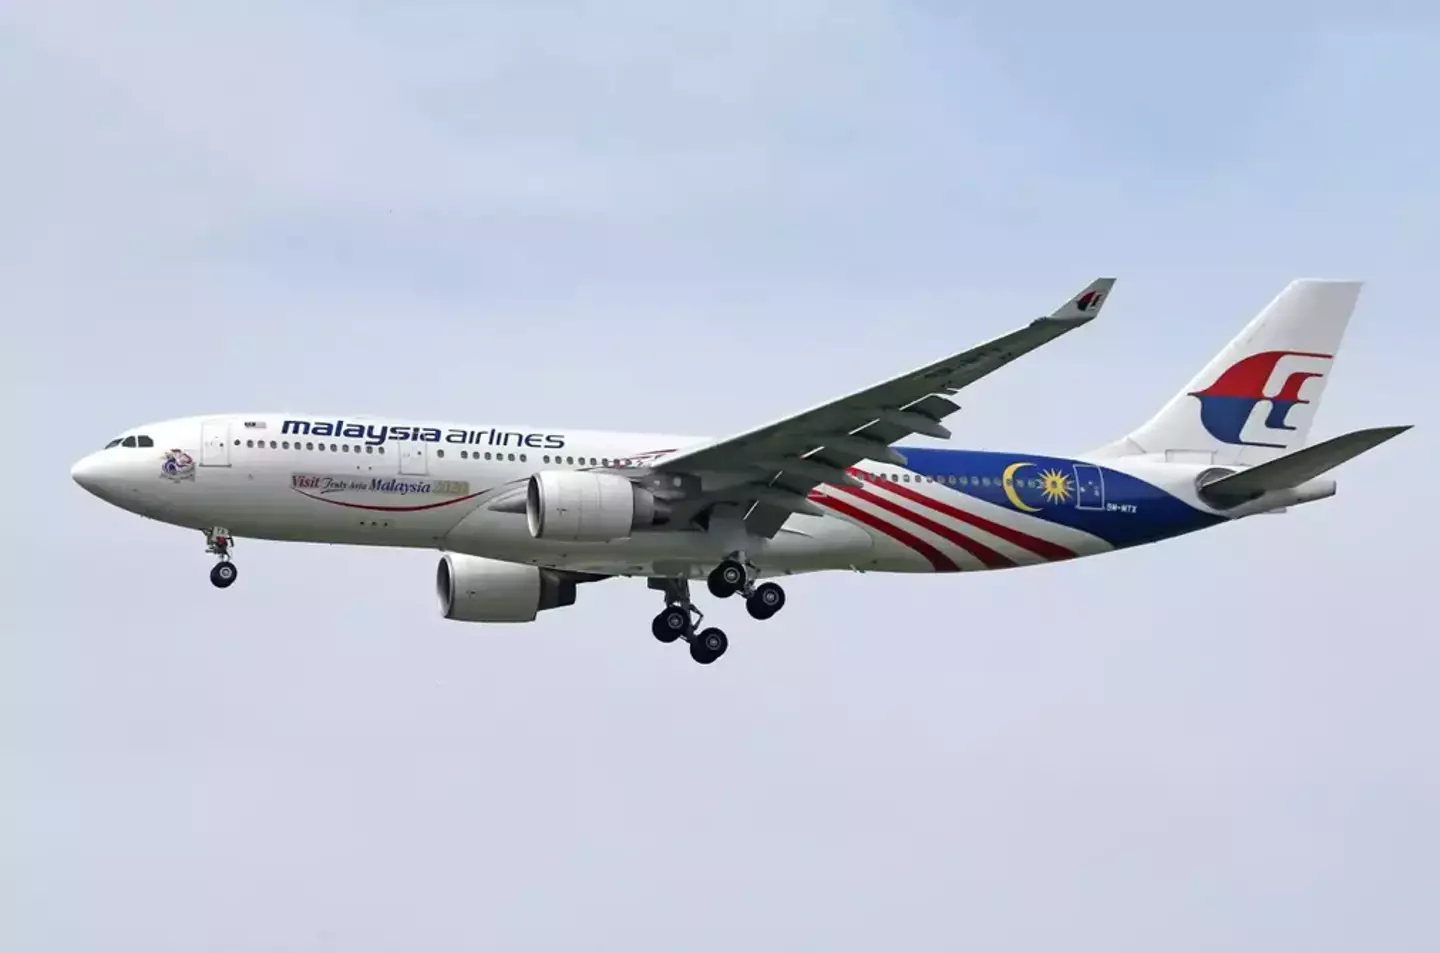 The case surrounding the Malaysia Airlines flight has remained a mystery.